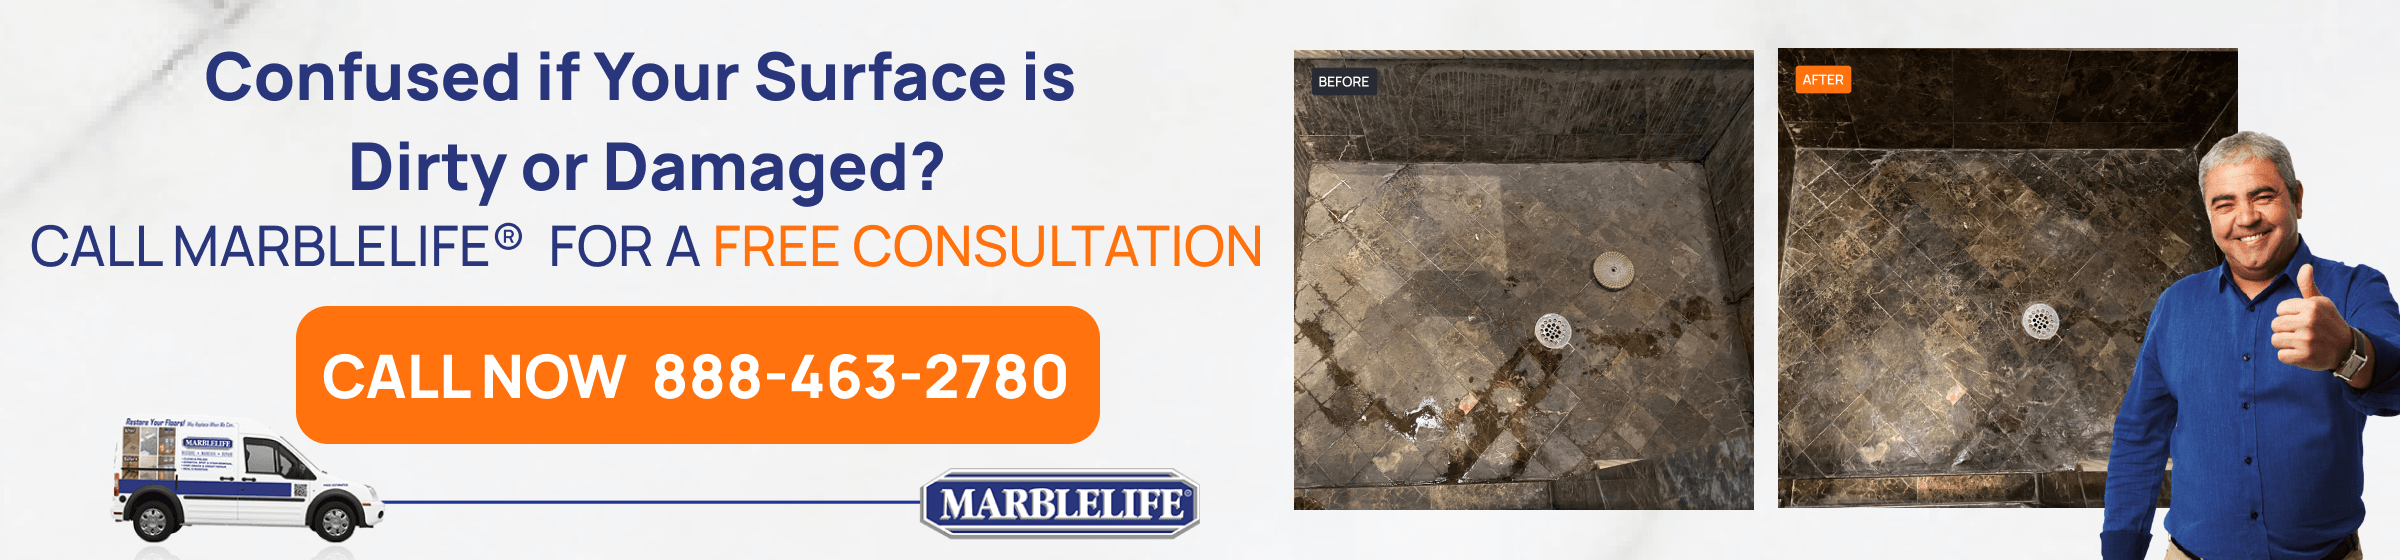 FREE CONSULTATION FROM MARBLELIFE EXPERTS